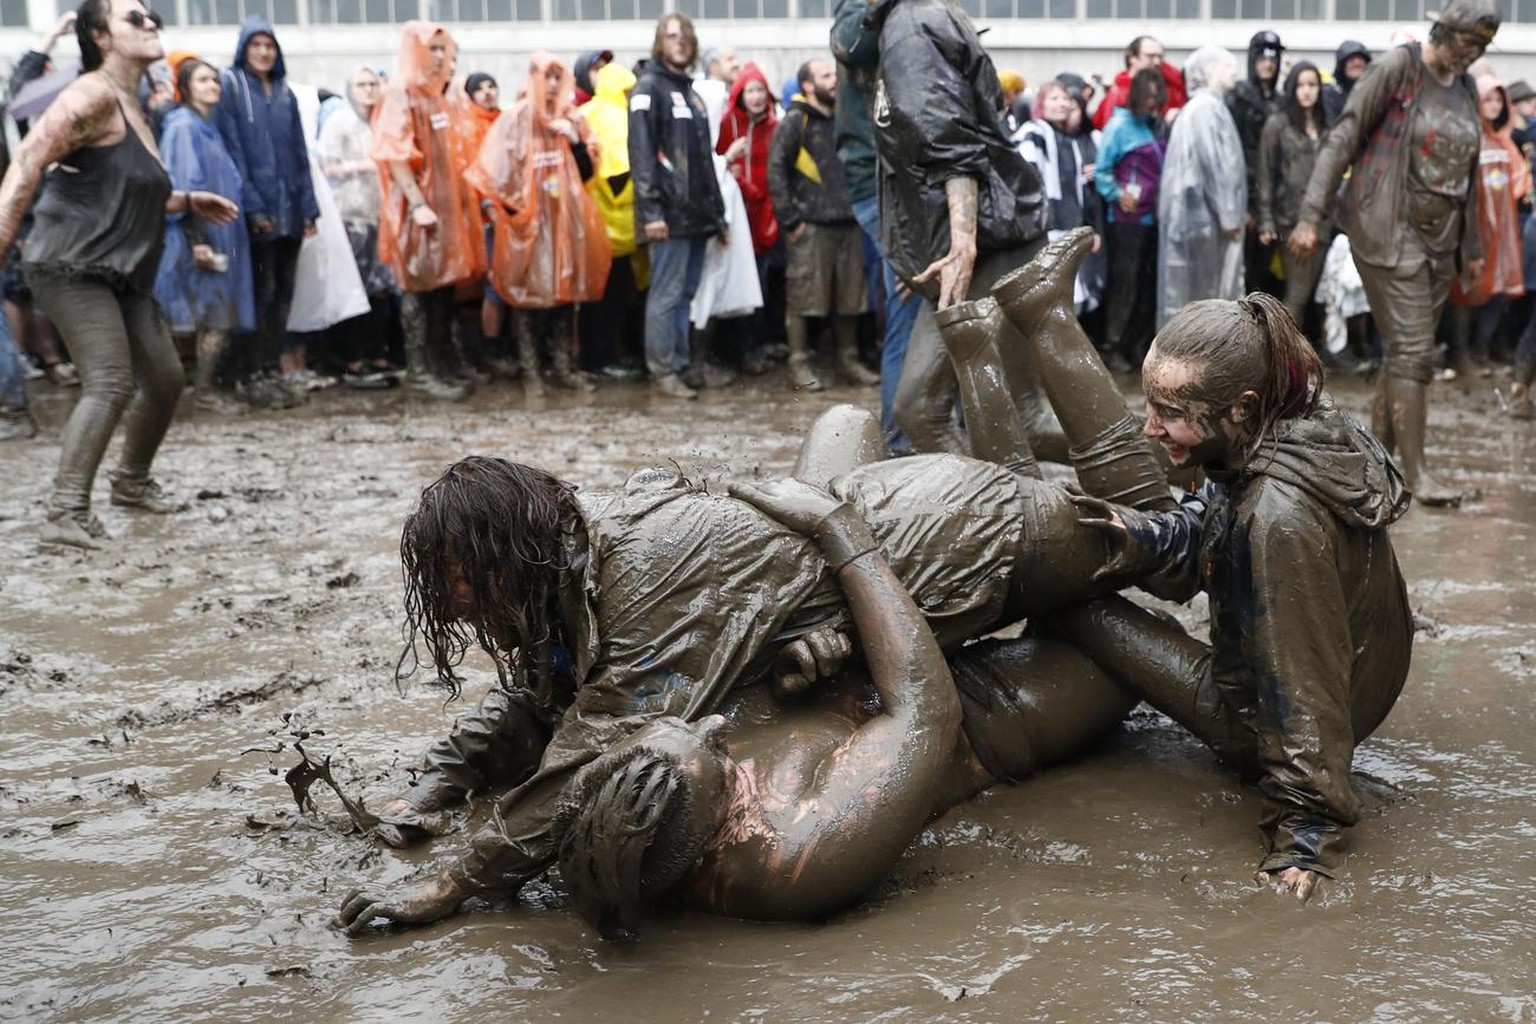 Rock fans dive in the mud at the Greenfield Openair, Wednesday, June 8, 2016, in Interlaken, Switzerland. The openair music event runs from 8 to 11 June. (KEYSTONE/Peter Klaunzer)